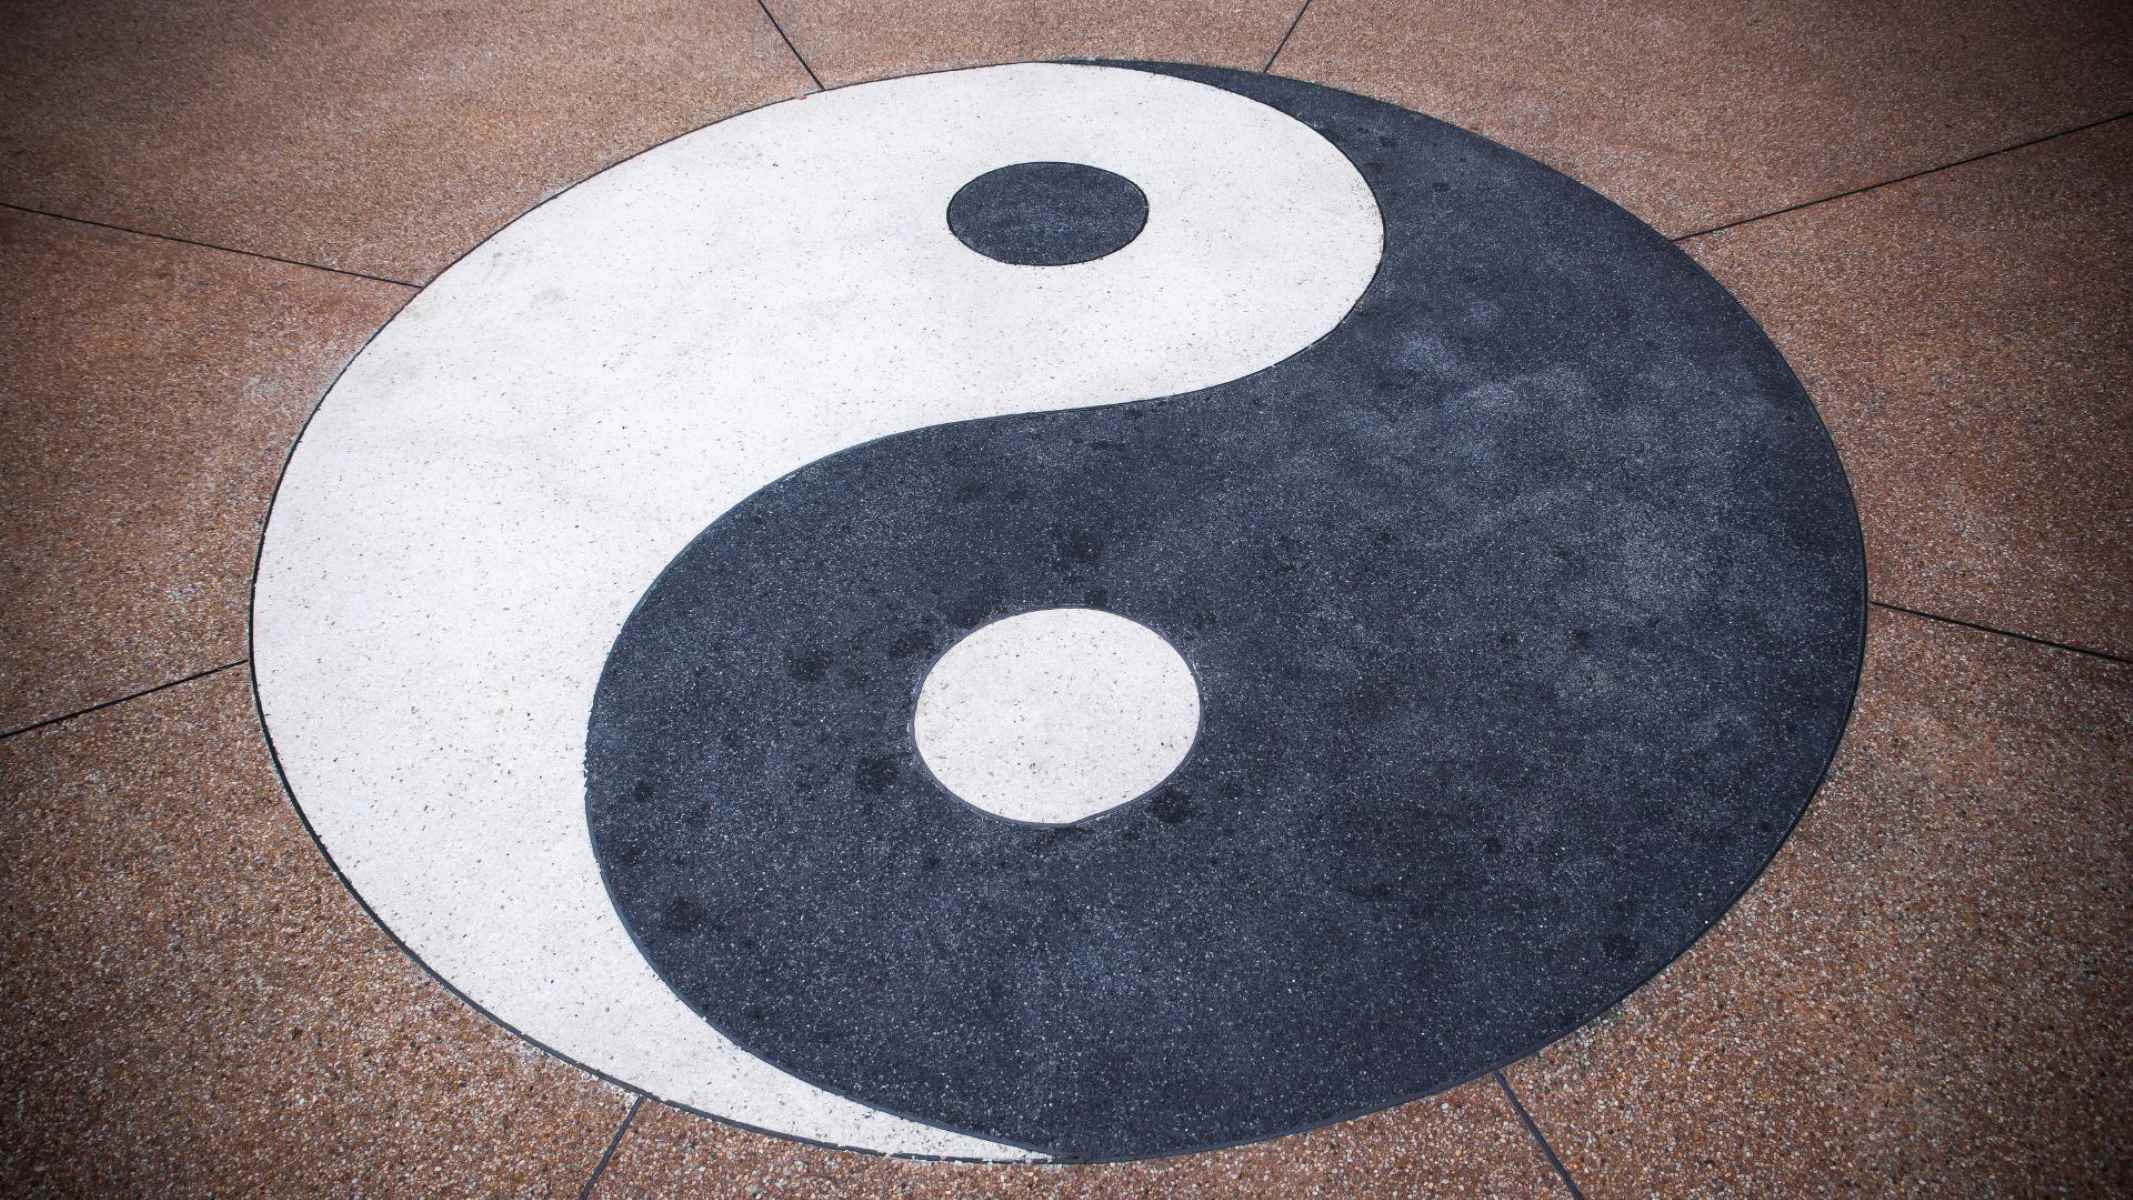 10 Alternative Names For Yin And Yang That Will Blow Your Mind!